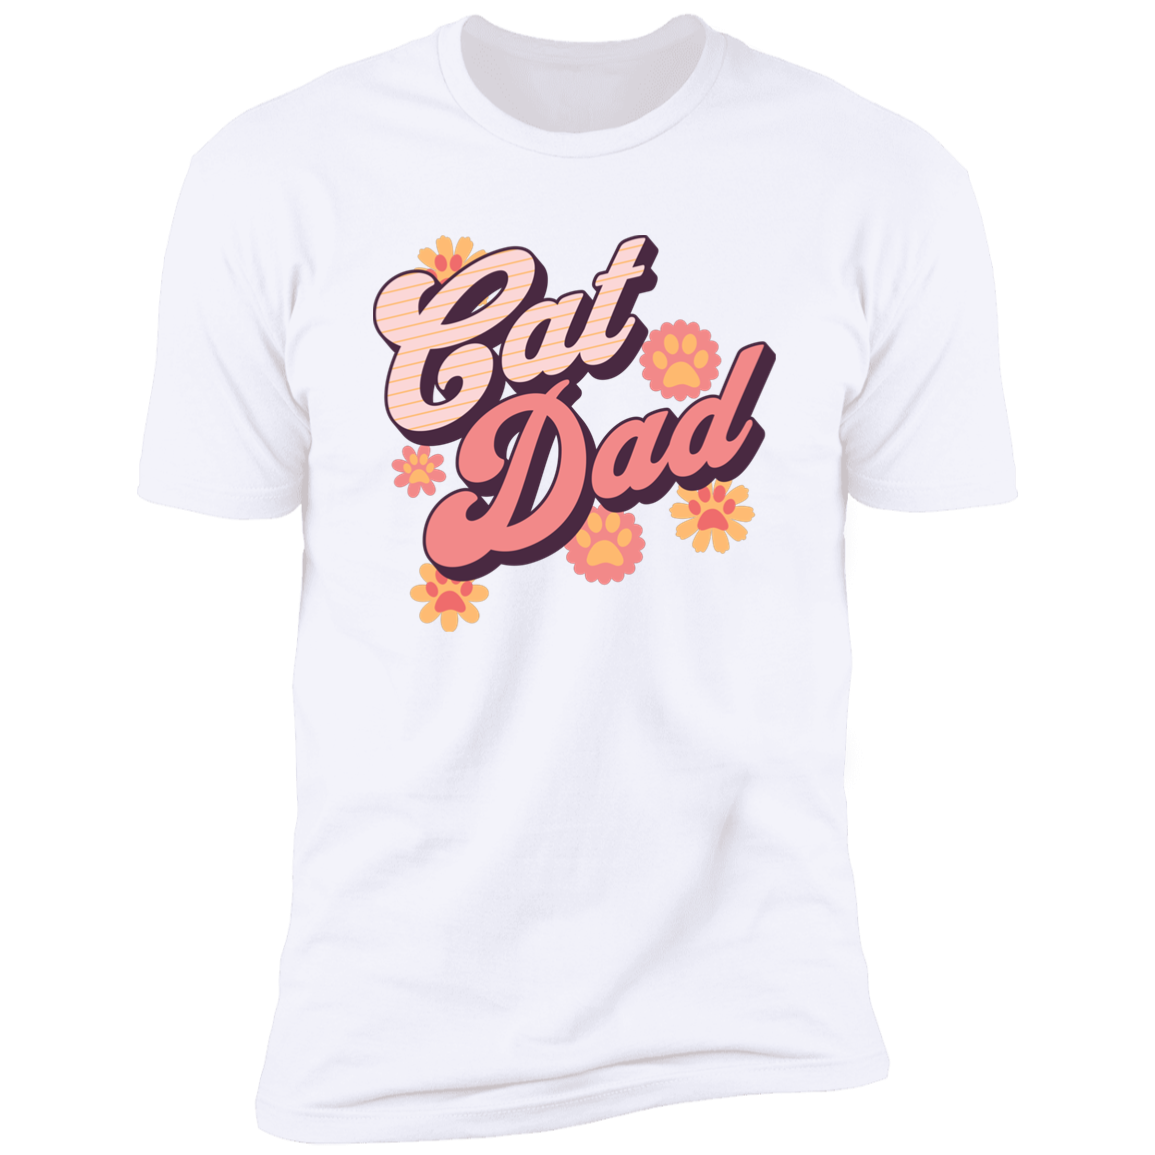 Cat Dad Retro T-shirt, Cat shirt for humans, retro cat dad t-shirt, in white